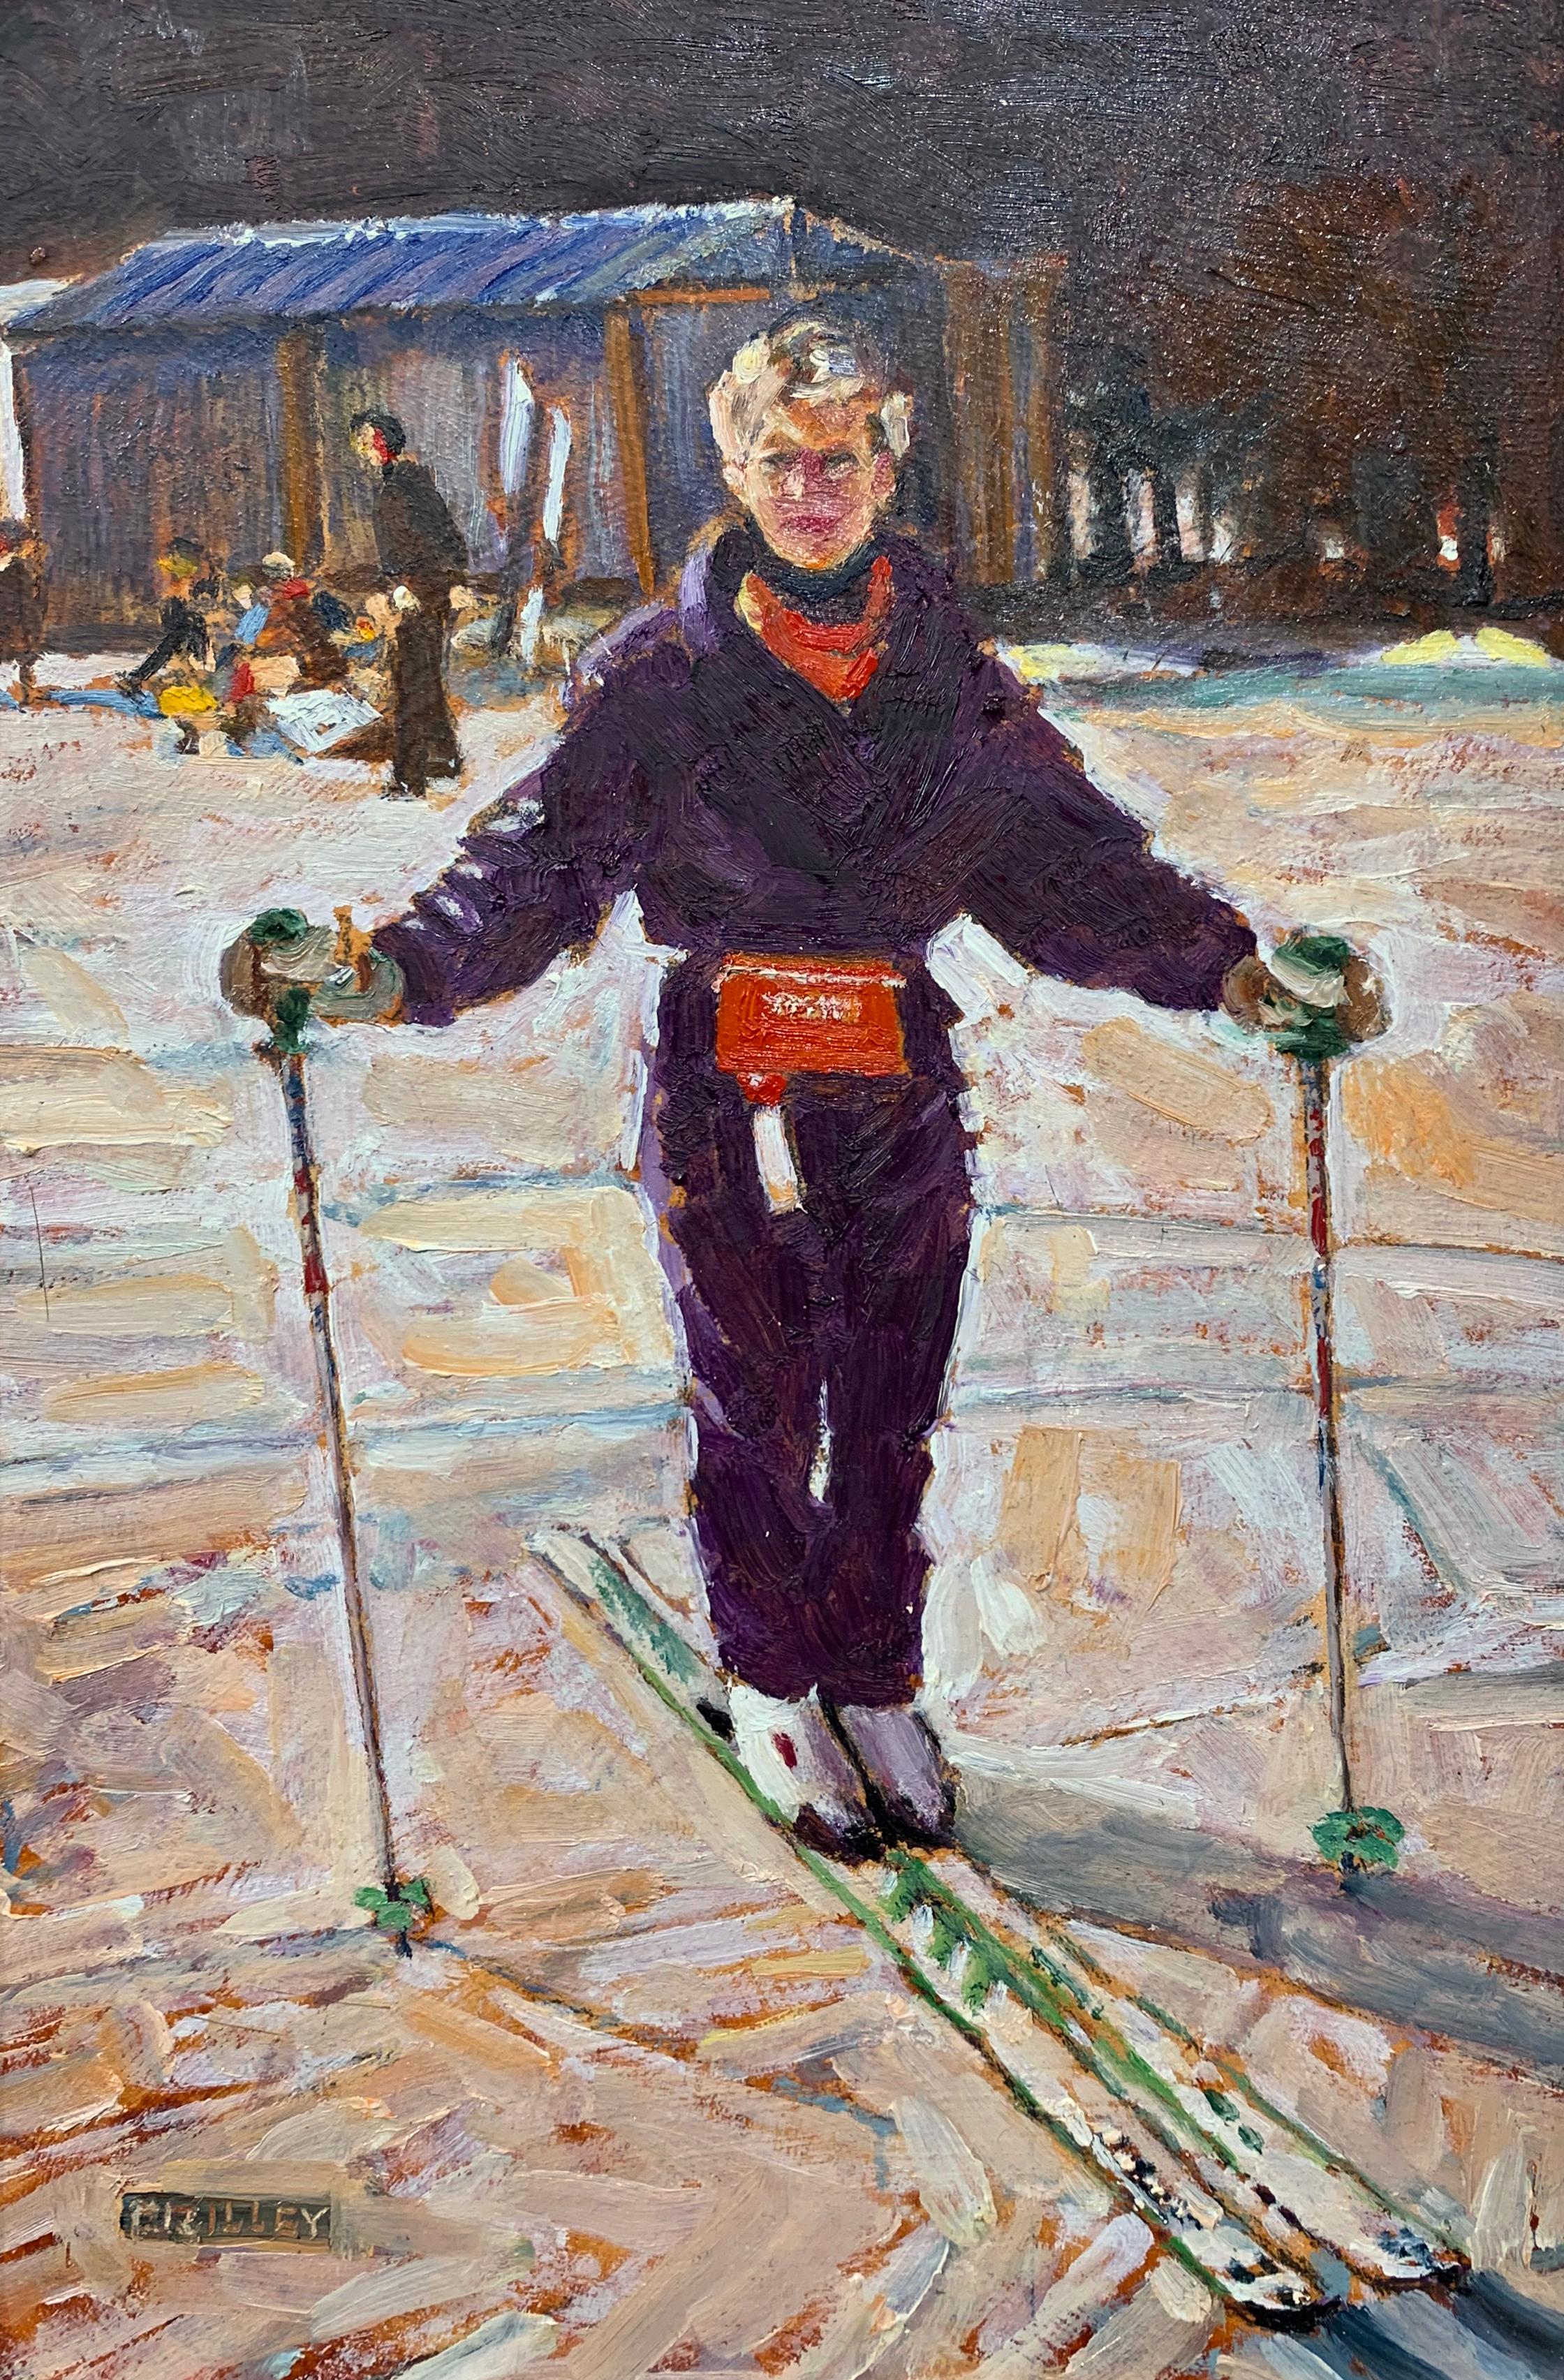 Sue on Skis, Portrait of the Artist's Wife in Snowy Landscape, 2007